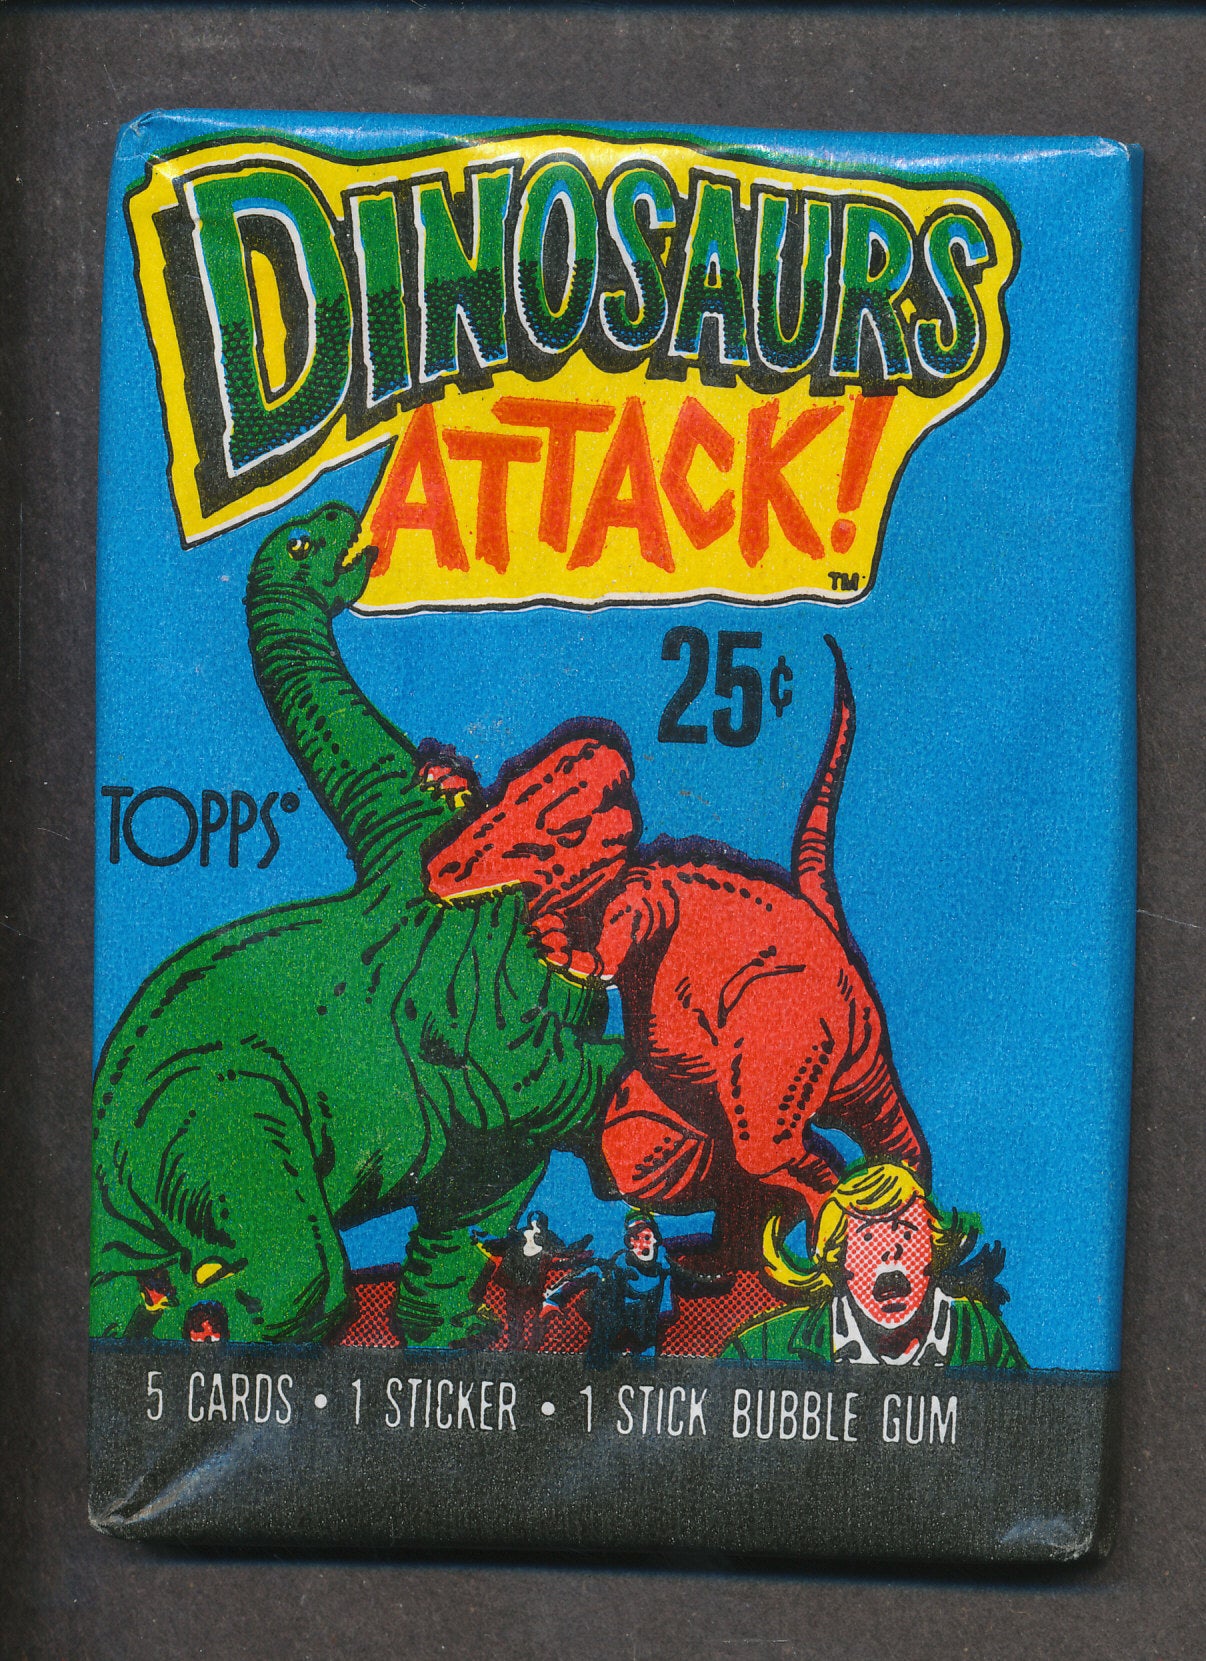 1988 Topps Dinosaurs Attack Unopened Wax Pack